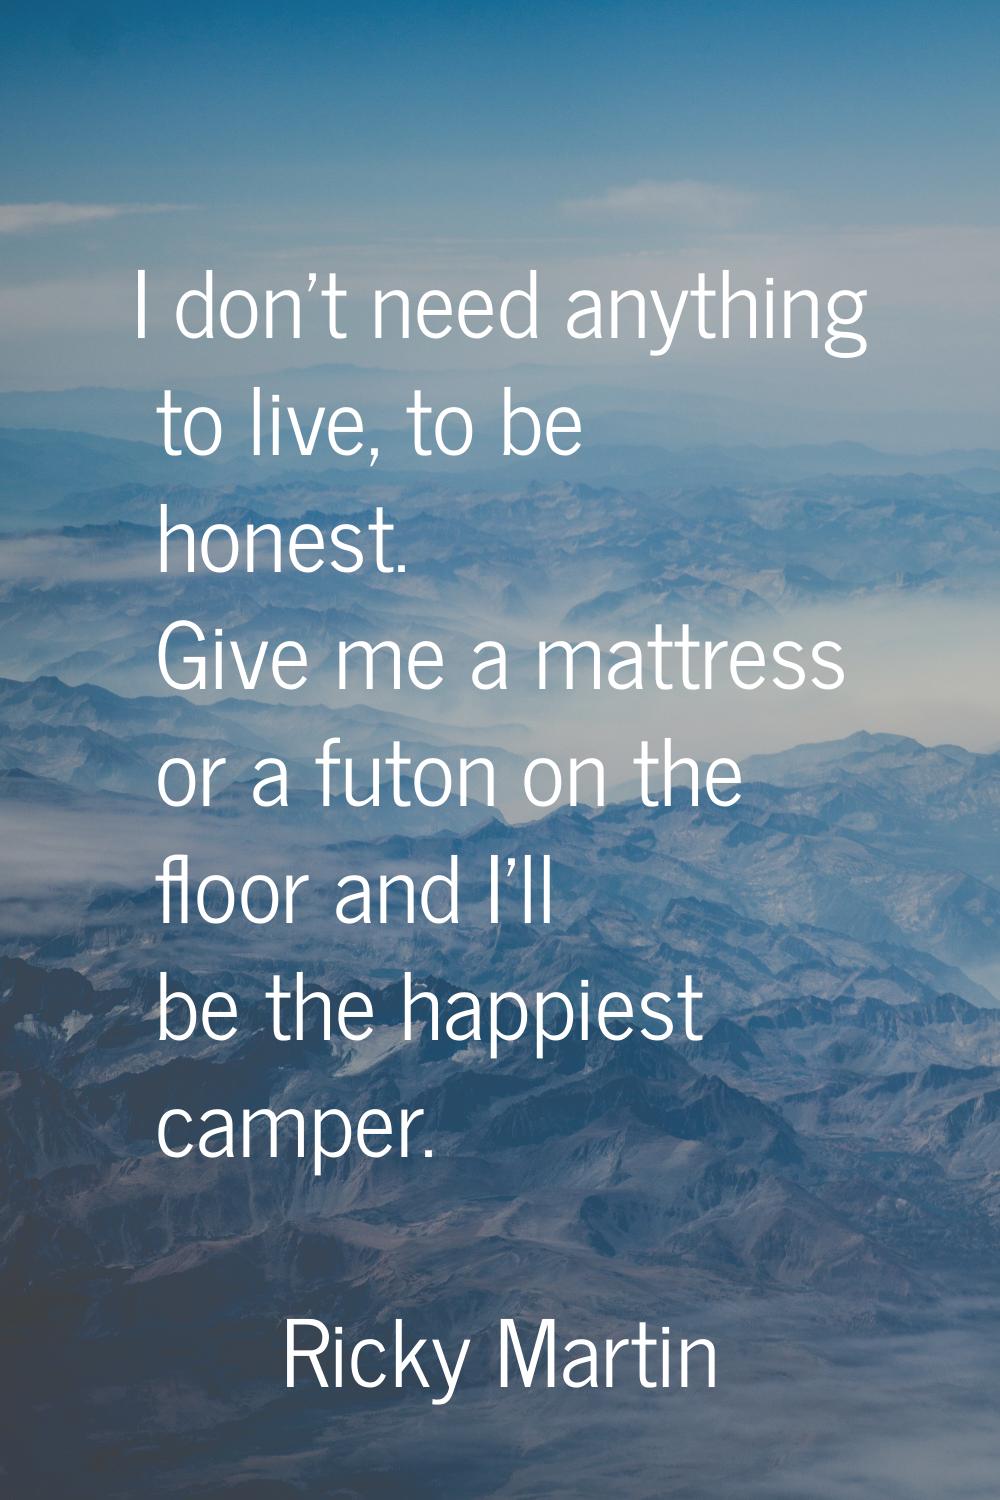 I don't need anything to live, to be honest. Give me a mattress or a futon on the floor and I'll be